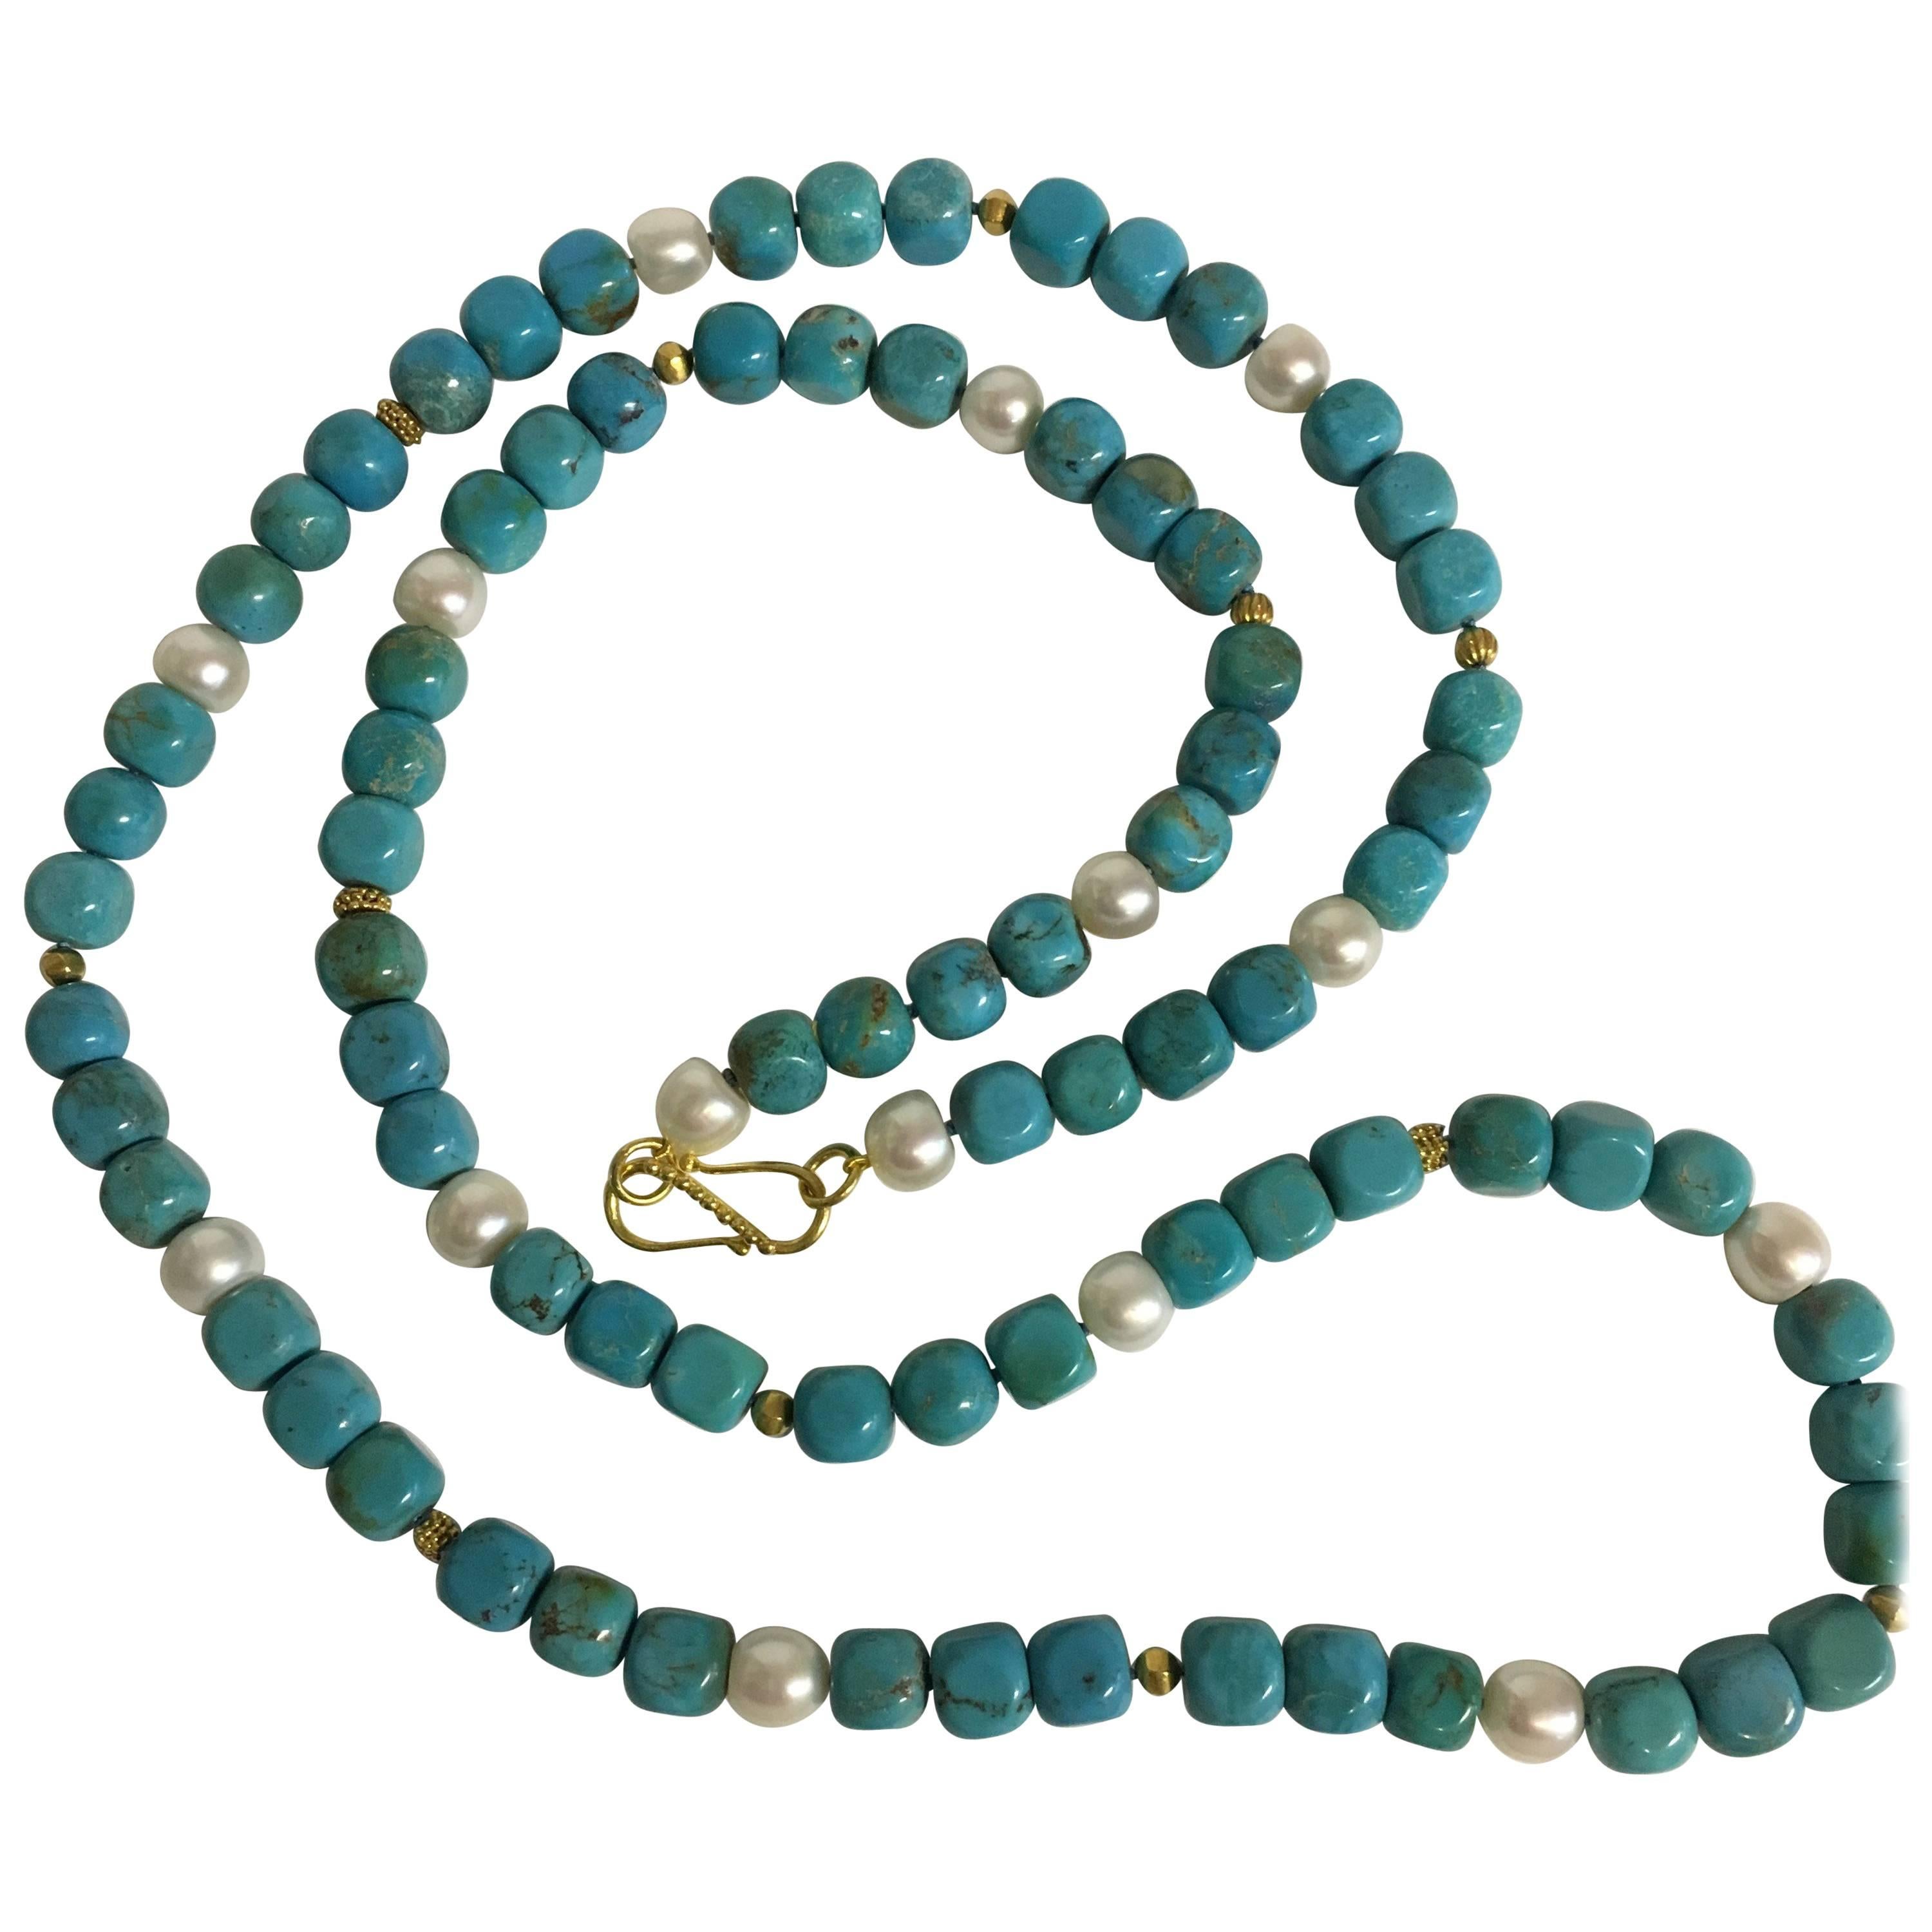 Turquoise Necklace with Freshwater Pearls and 18 Karat Gold Beads